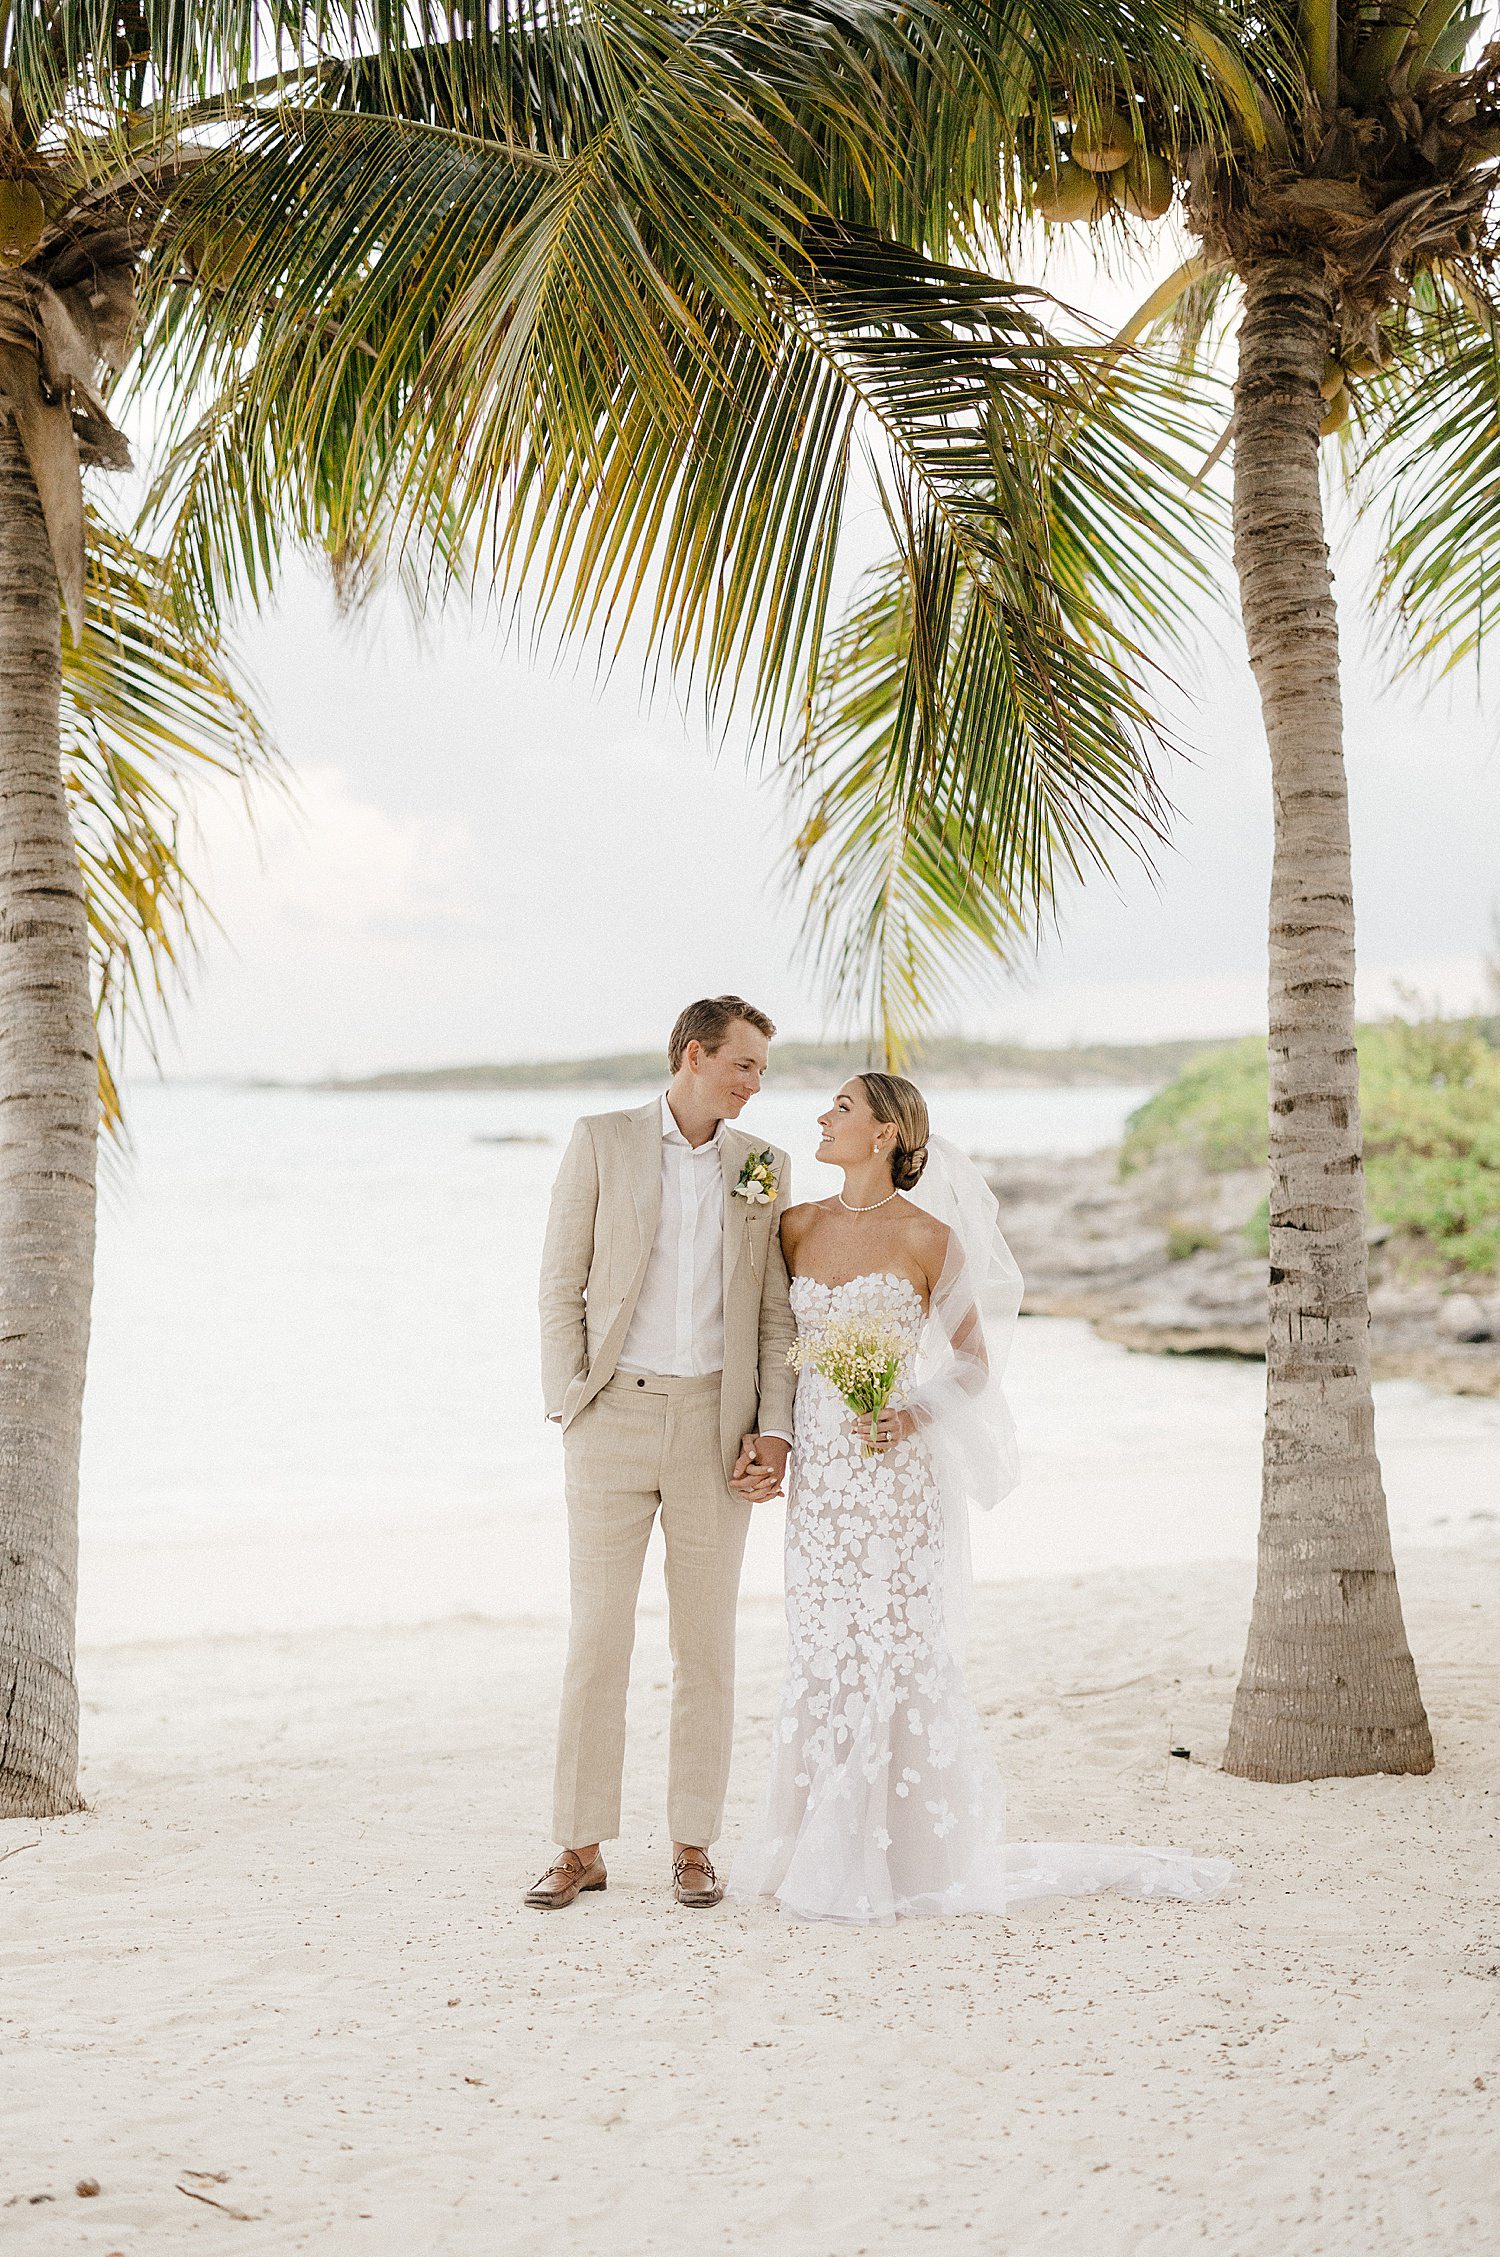 Bride and groom at destination wedding in the Bahamas